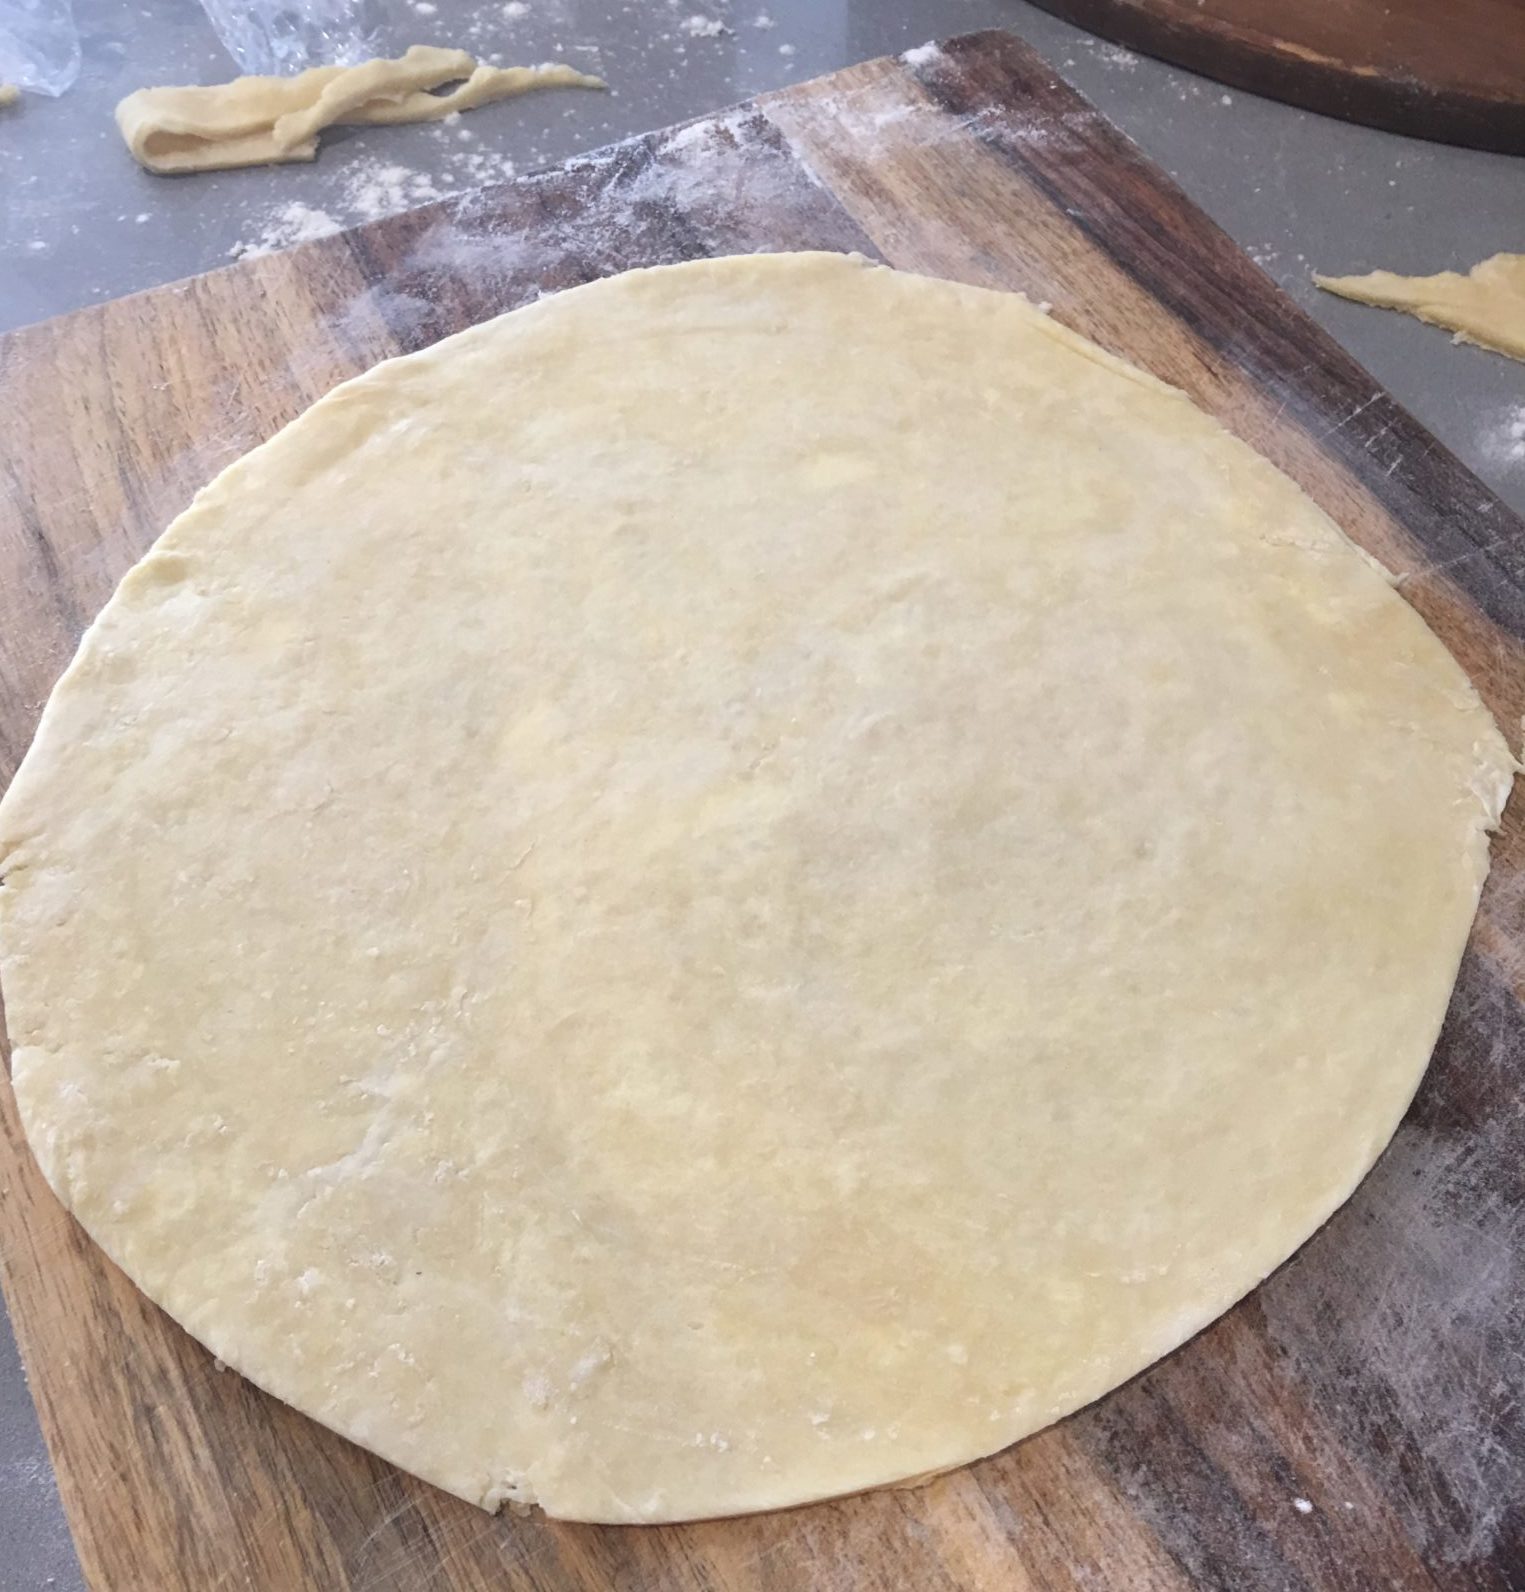 A rolled circle of pie crust